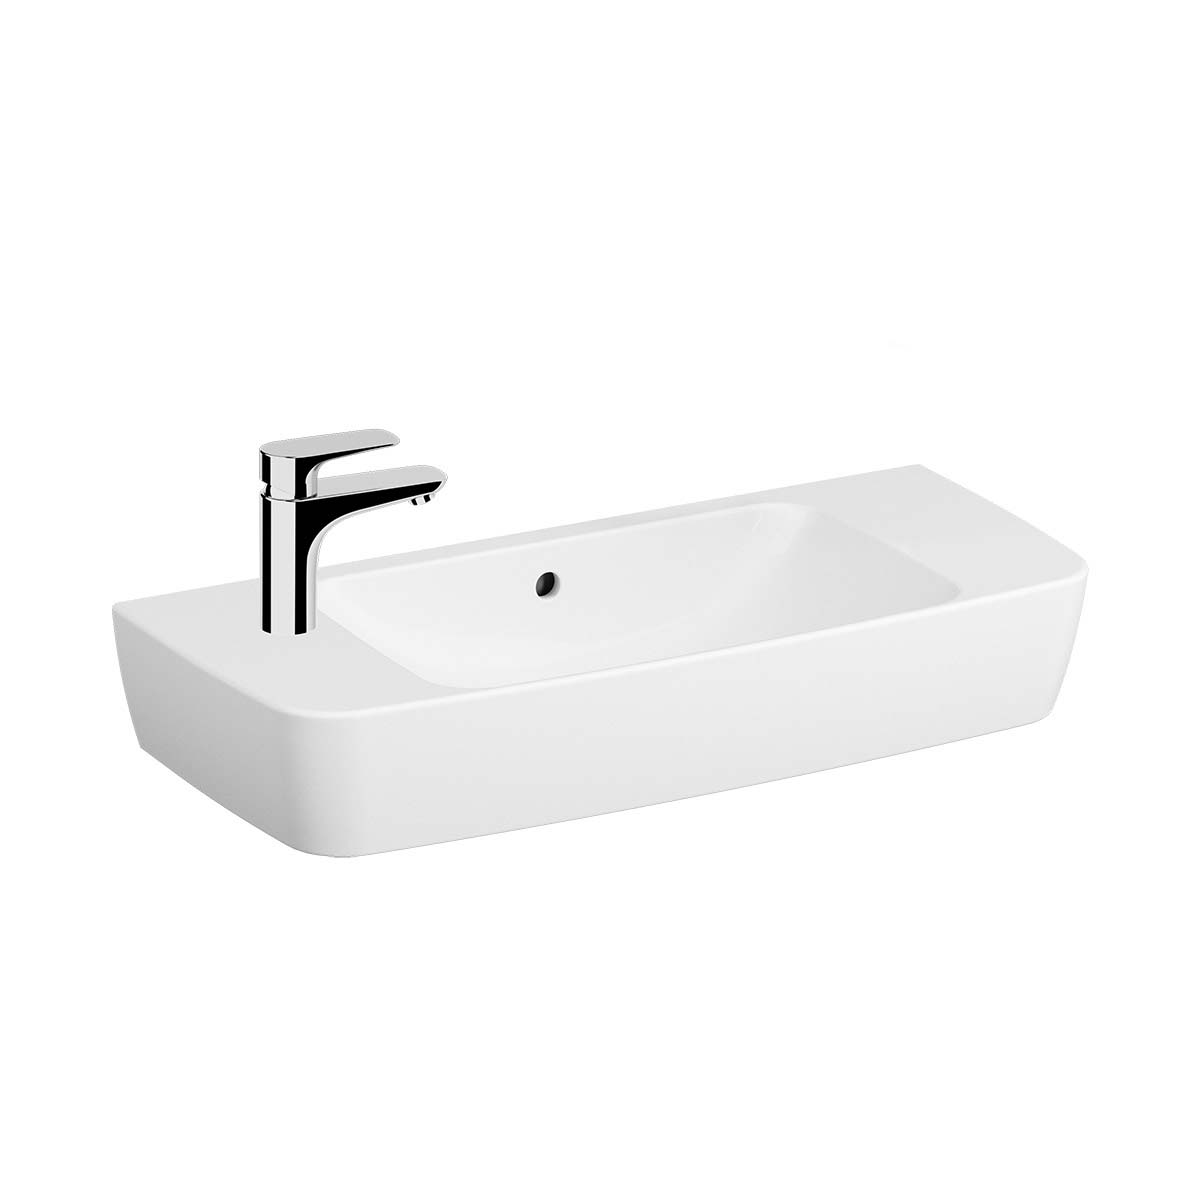 Compact Basin, One Tap Hole Left, Overflow Hole, 80X35 cm